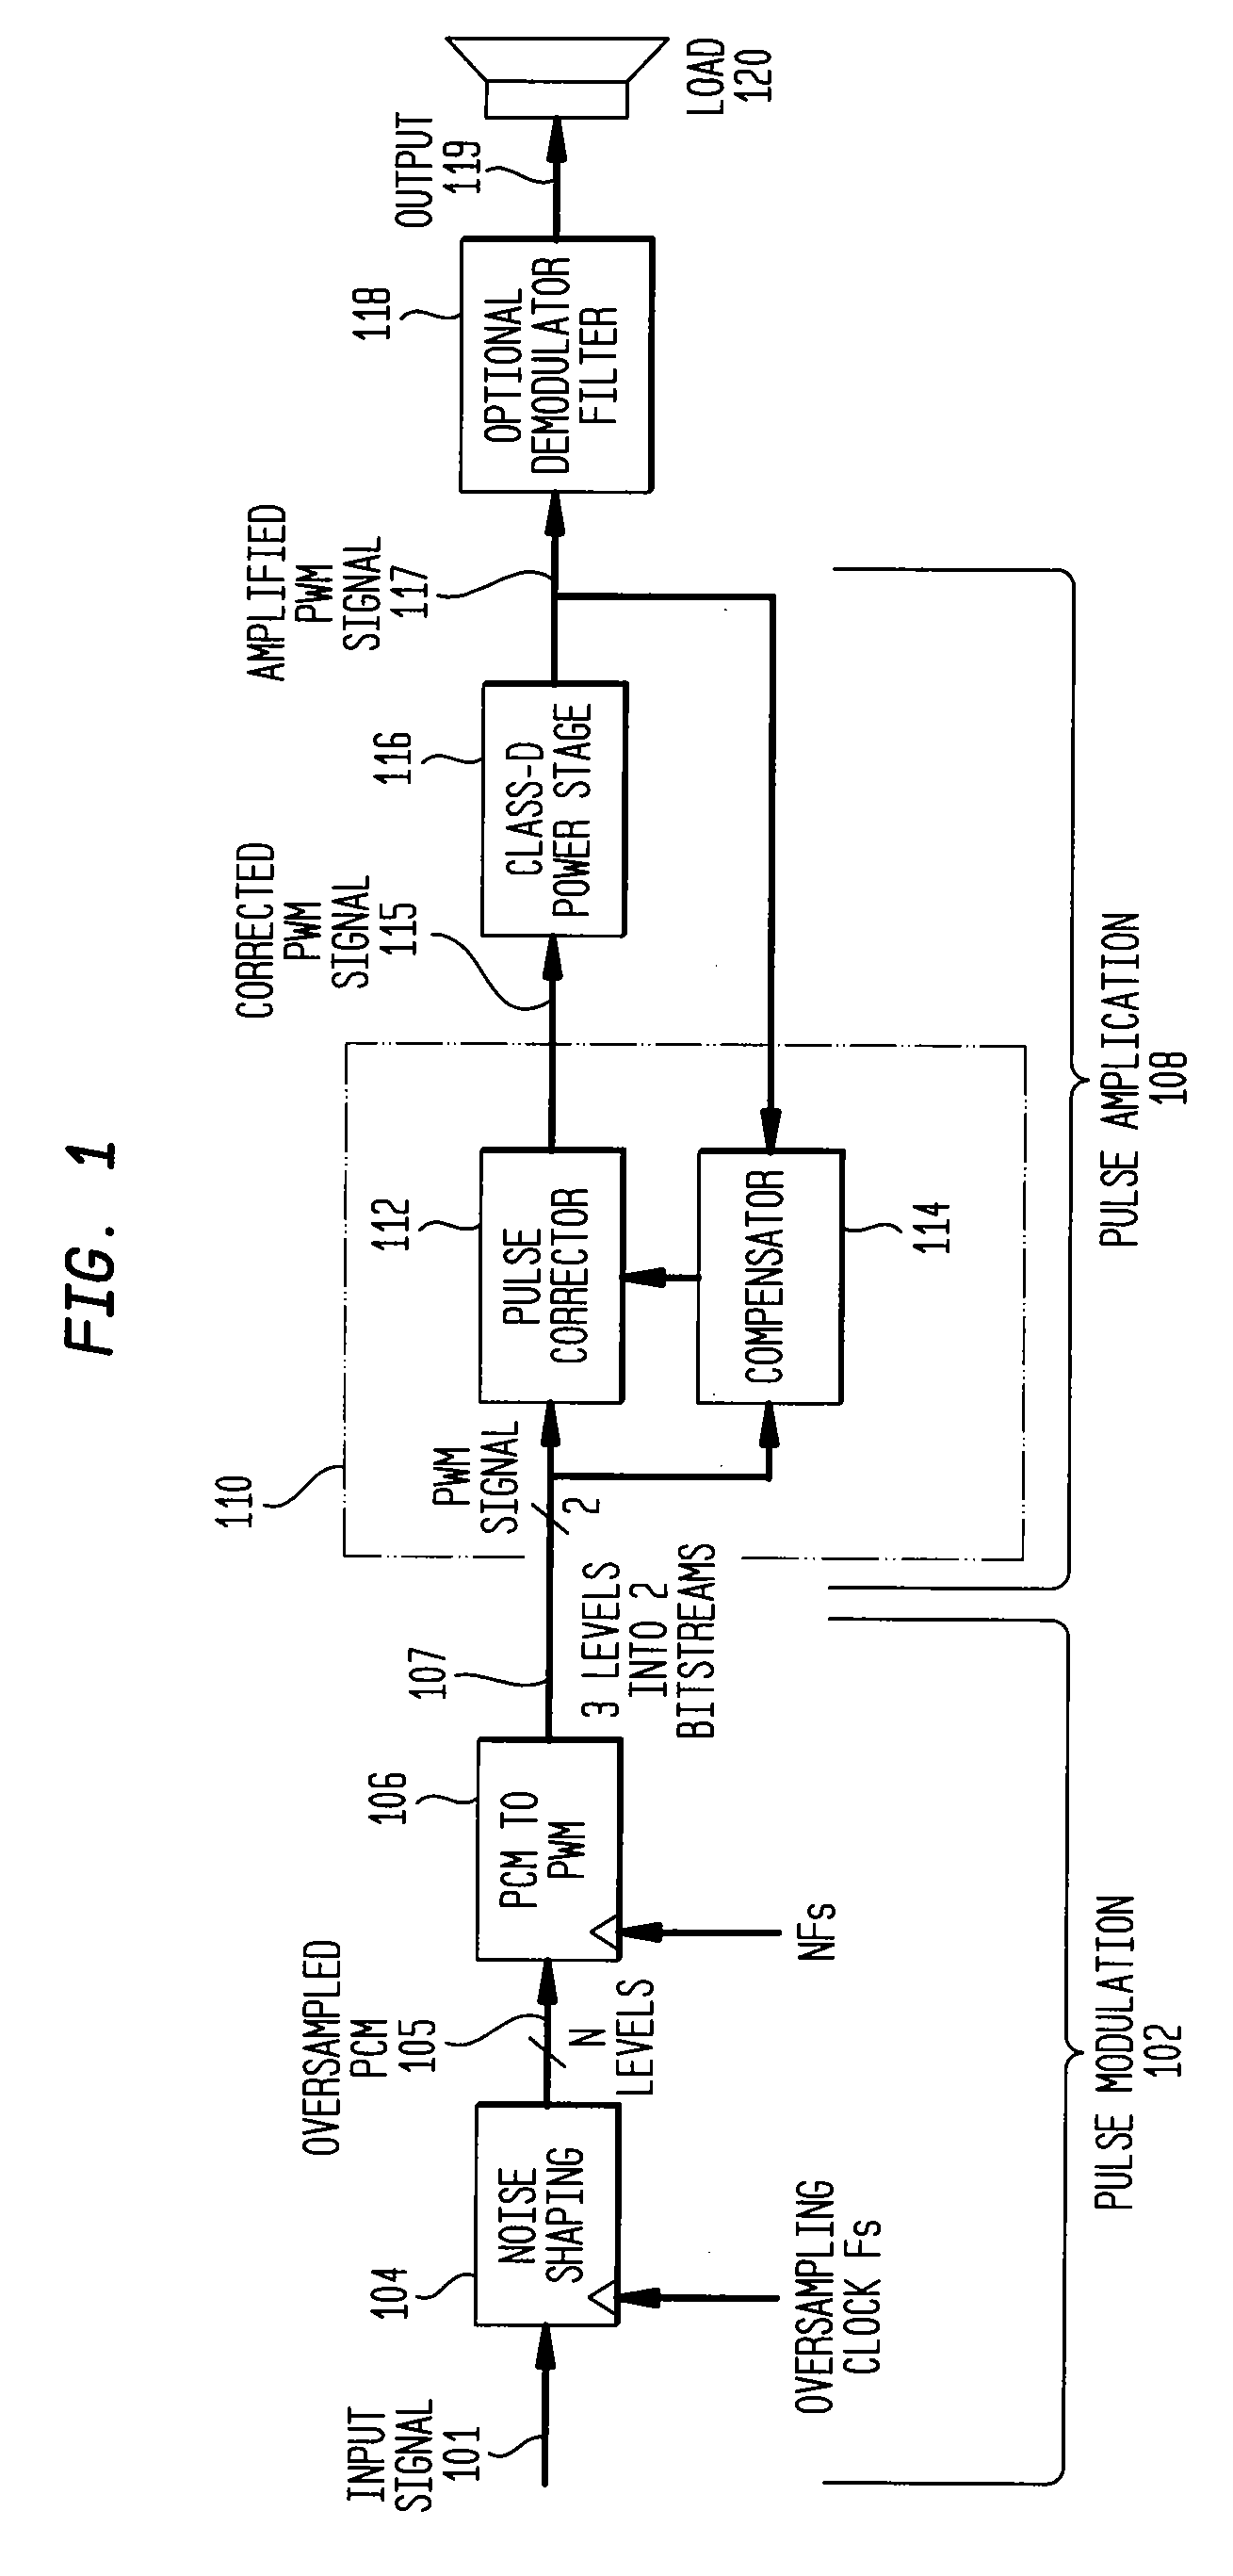 Class D Amplifier Having PWM Circuit with Look-up Table